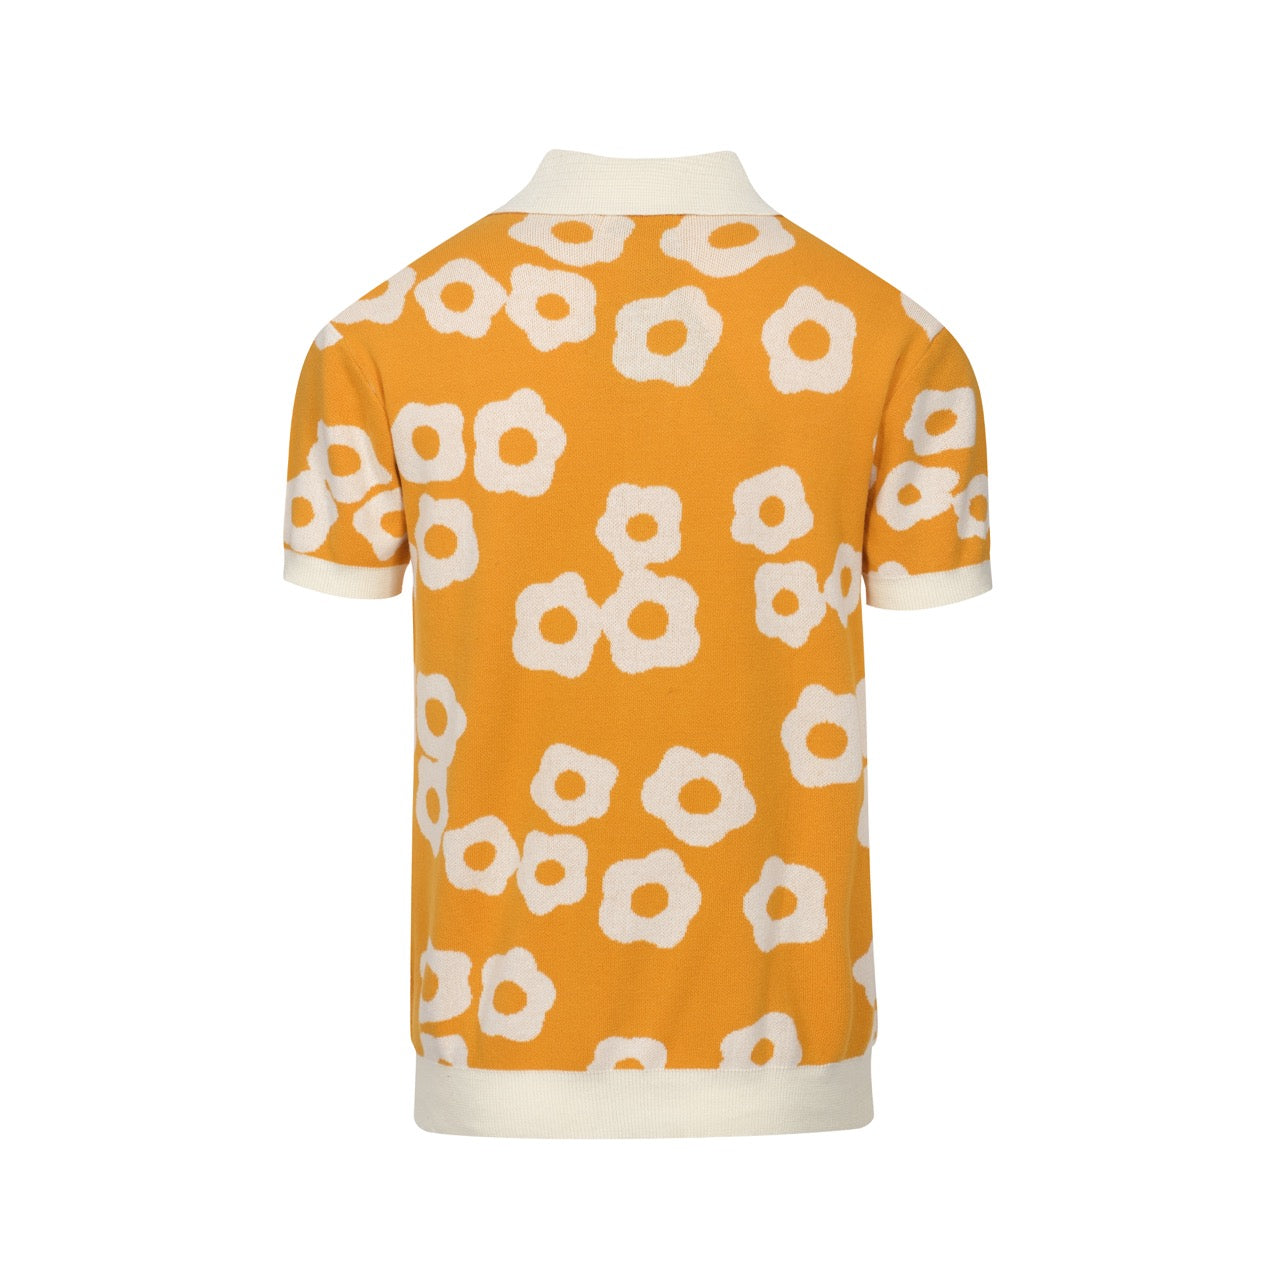 Men's Yellow And White Jacquard Design Knitted Short Sleeve Polo Shirt